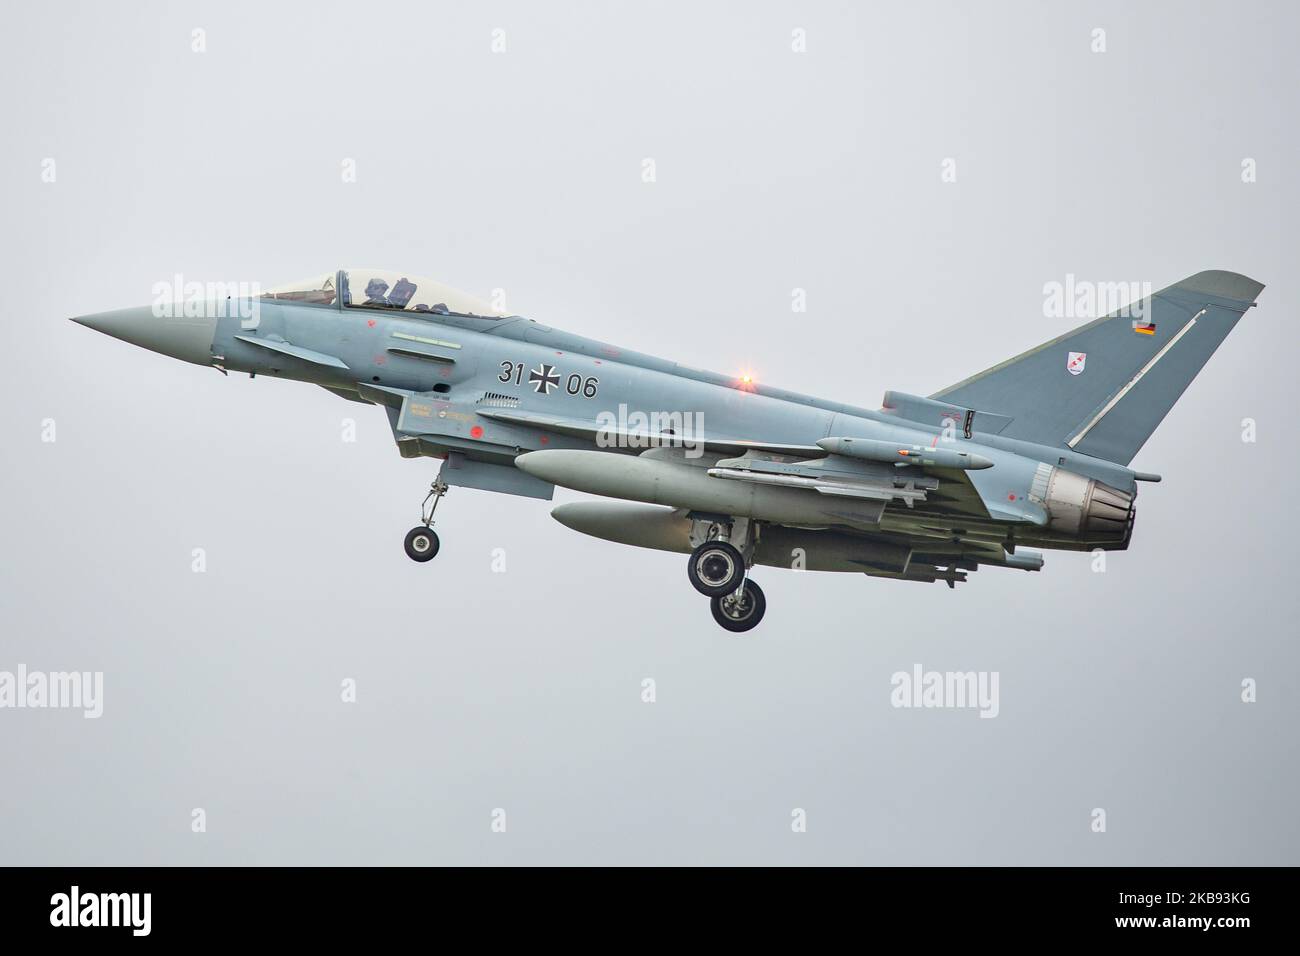 Eurofighter EF-2000 Typhoon of the German Air Force Luftwaffe with registration 31+06 ( 3106 ) as seen flying on final approach and landing at Kleine Brogel Military Air Base EBBL airport in Belgium before the International Sanicole Airshow at Sanicole Airfield Vliegveld at Hechtel - Eksel / Leopoldsburg / Beverlo Airfield EBLE a former Belgian military airfield. The plane will be in a static exhibition and flying demonstration at the air show. Kleine Brogel, Belgium - September 13, 2019 (Photo by Nicolas Economou/NurPhoto) Stock Photo